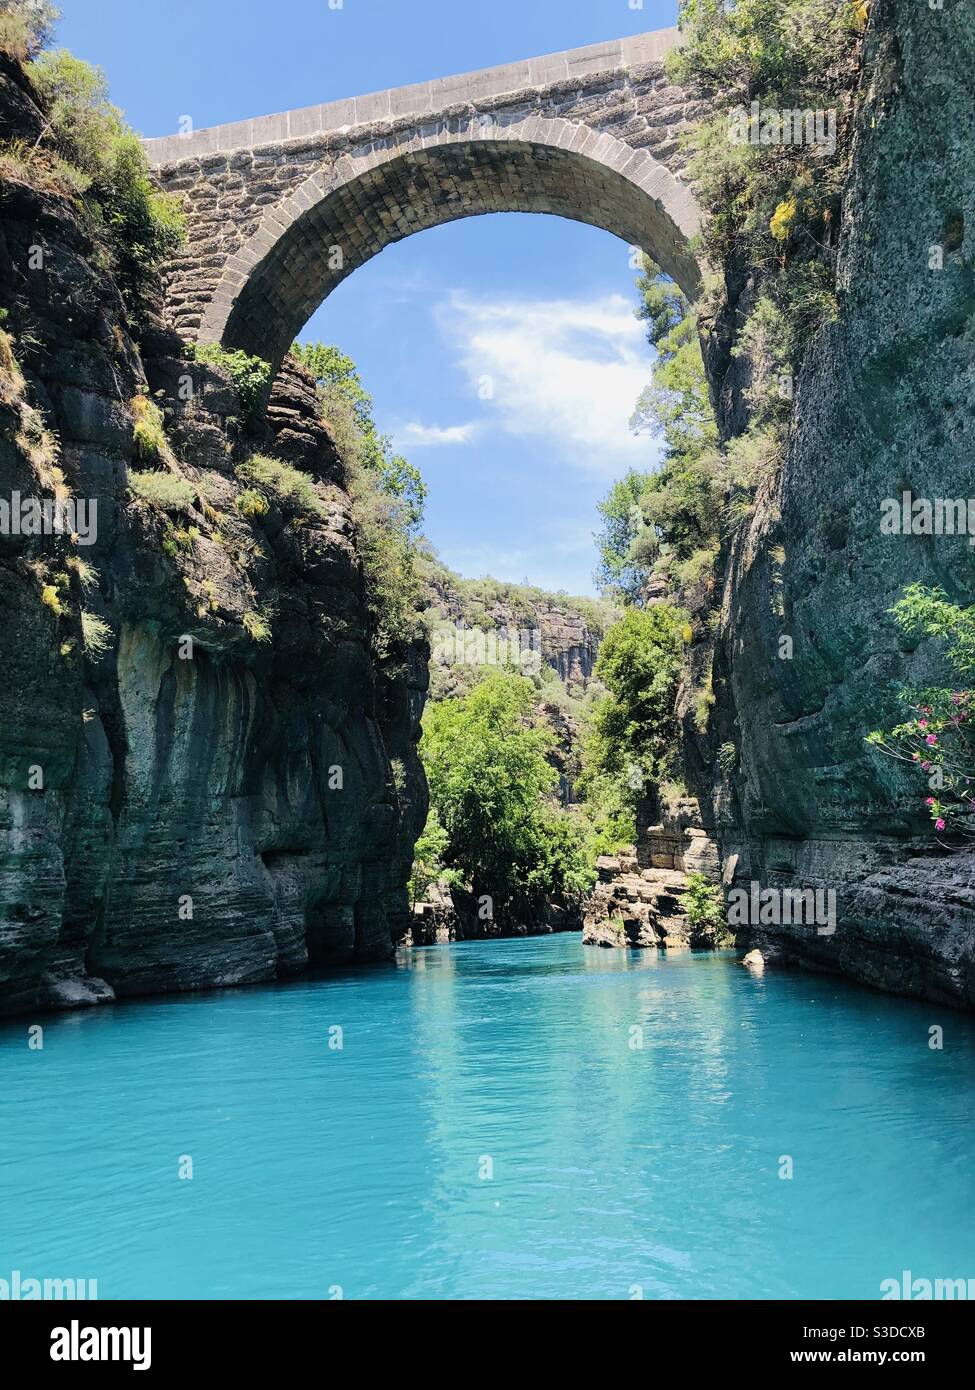 An ancient bridge built just above this amazingly turquoise flowing river between the mountains Stock Photo